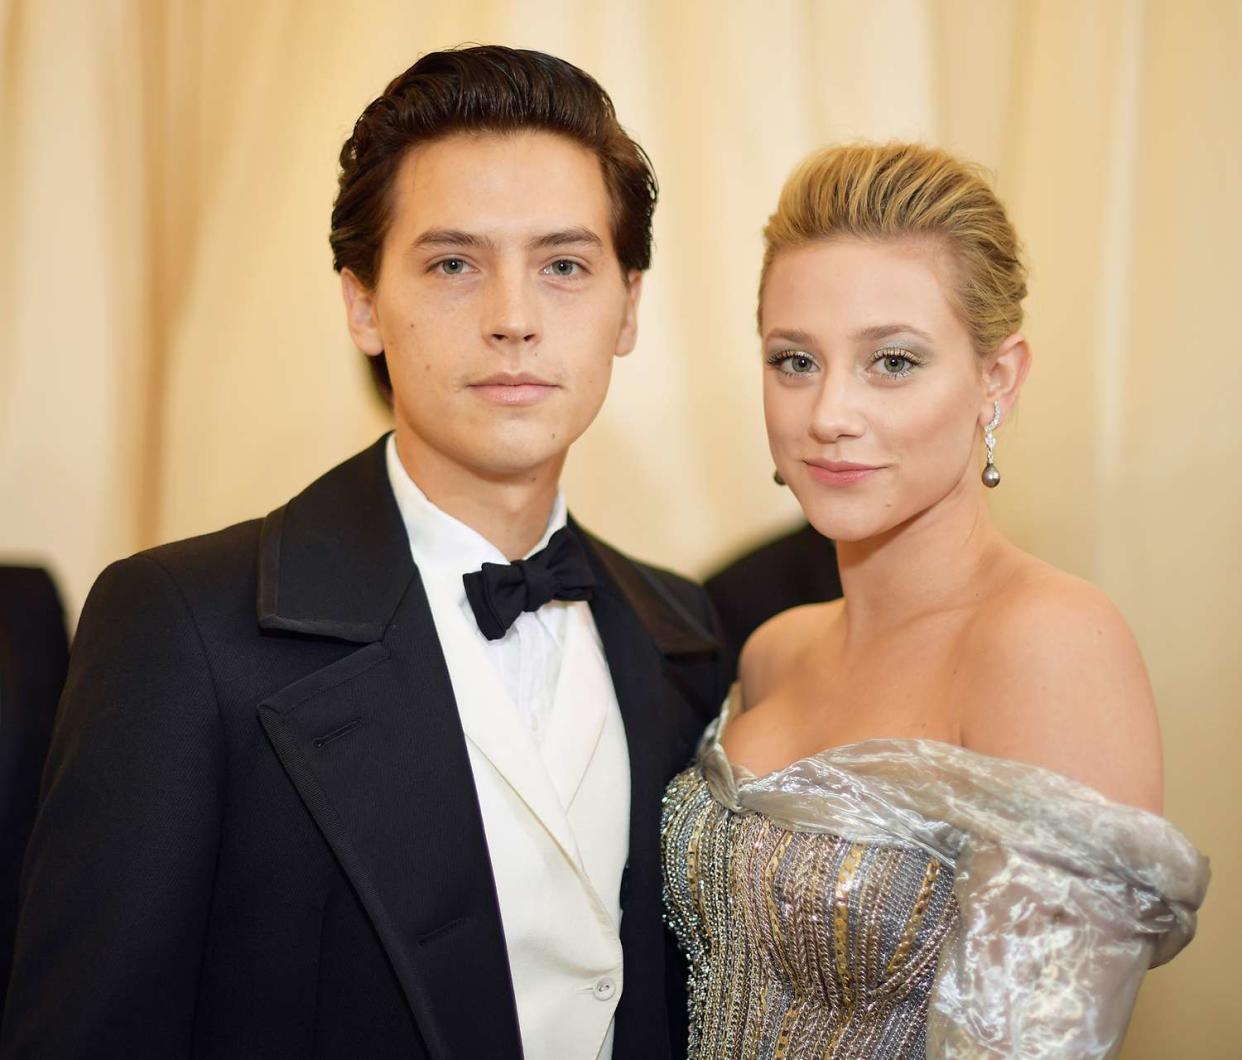 Cole Sprouse and Lili Reinhart attend the Heavenly Bodies: Fashion & The Catholic Imagination Costume Institute Gala at The Metropolitan Museum of Art on May 7, 2018 in New York City